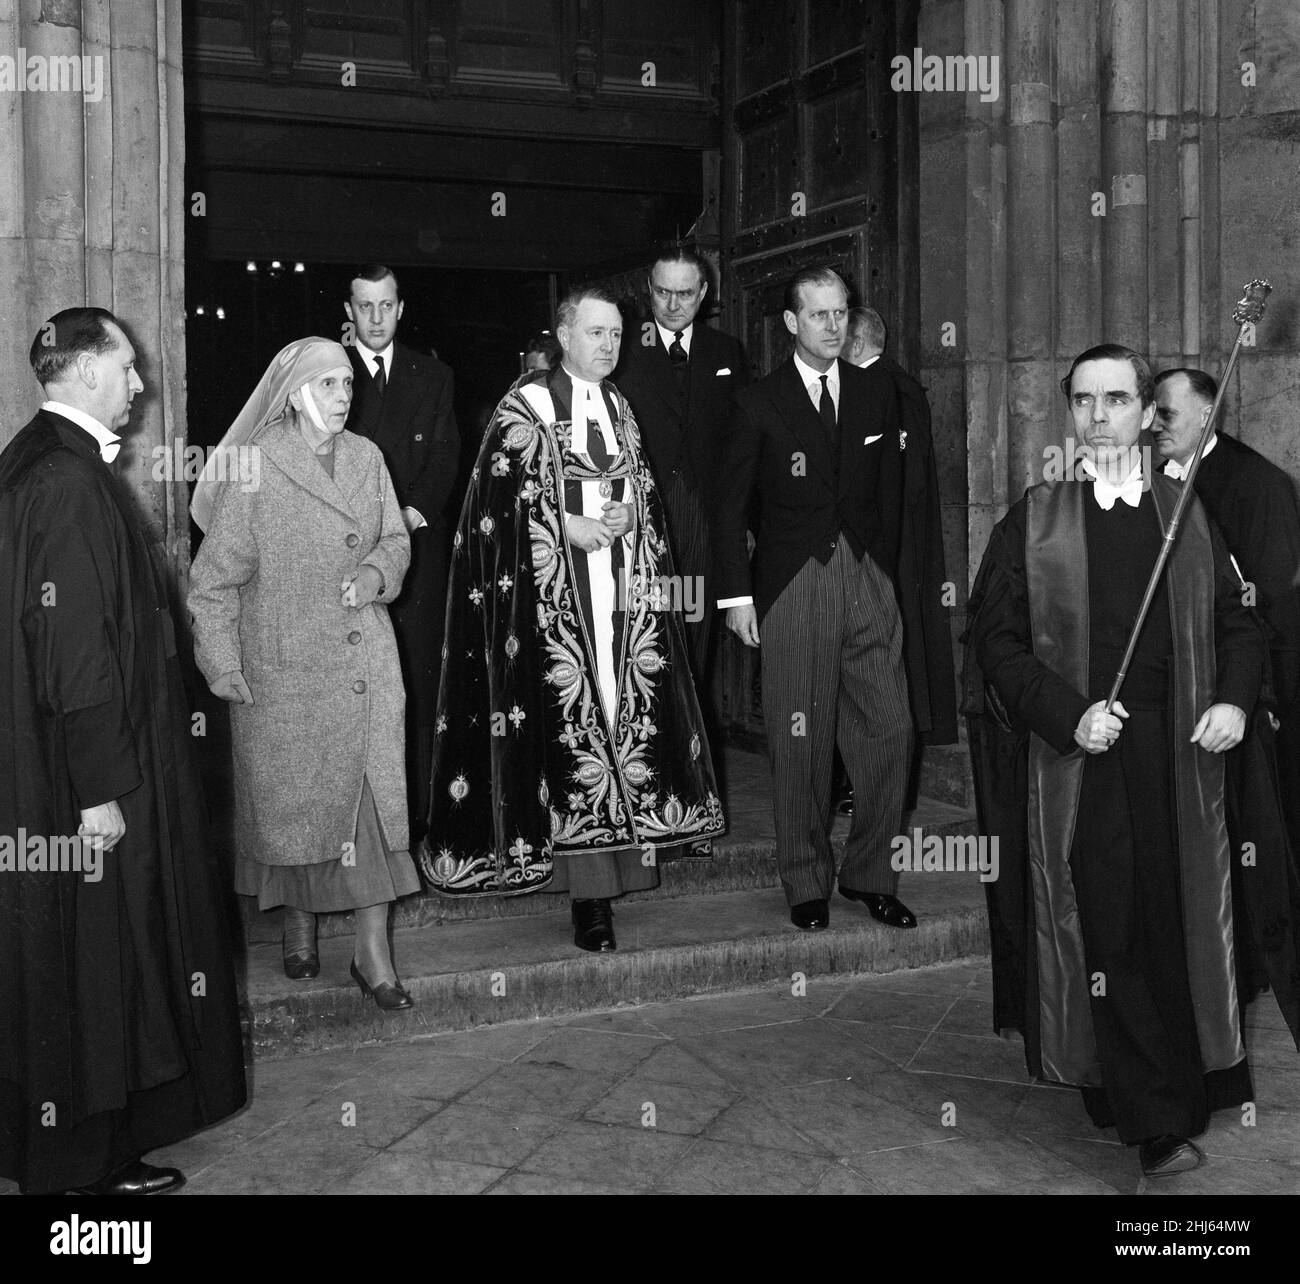 Memorial Service for Edwina Mountbatten, Countess Mountbatten of Burma at Westminster Abbey. Prince Philip, Duke of Edinburgh with his mother, Princess Alice. 7th March 1960. Stock Photo